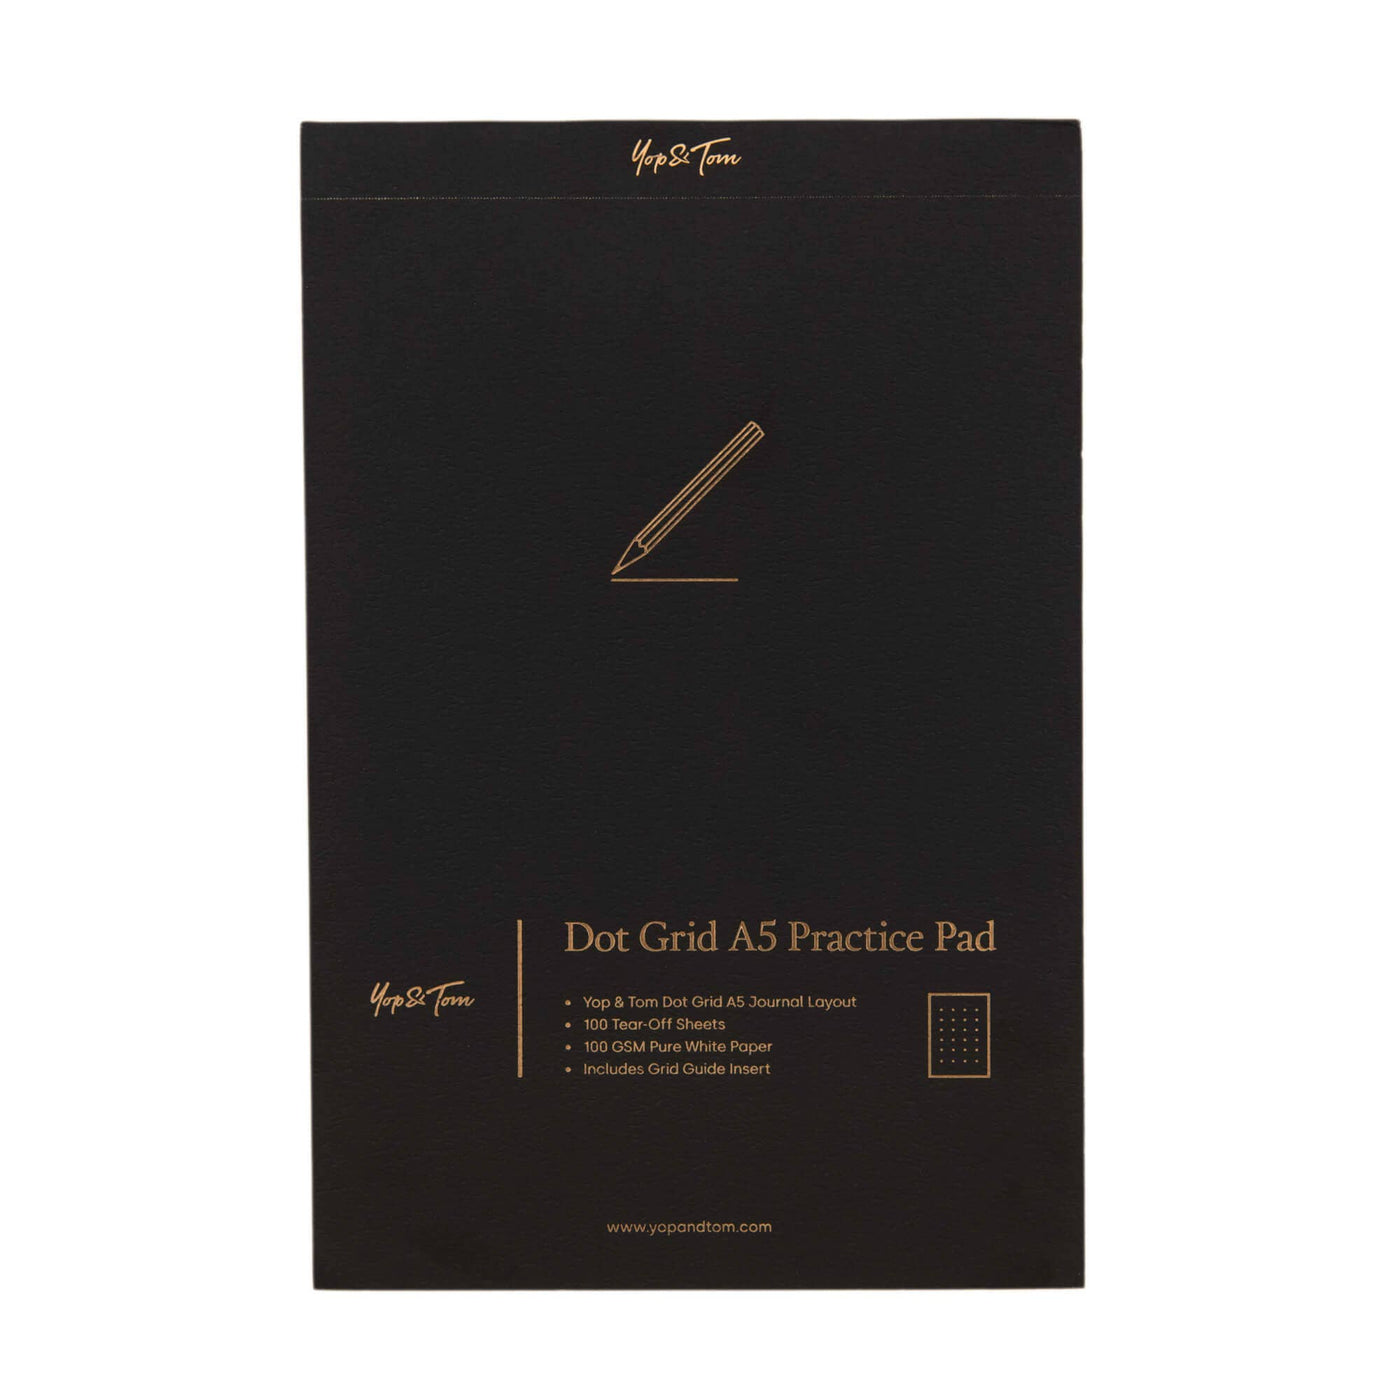 Dot Grid Practice Pad - 100 Tear-Off Sheets